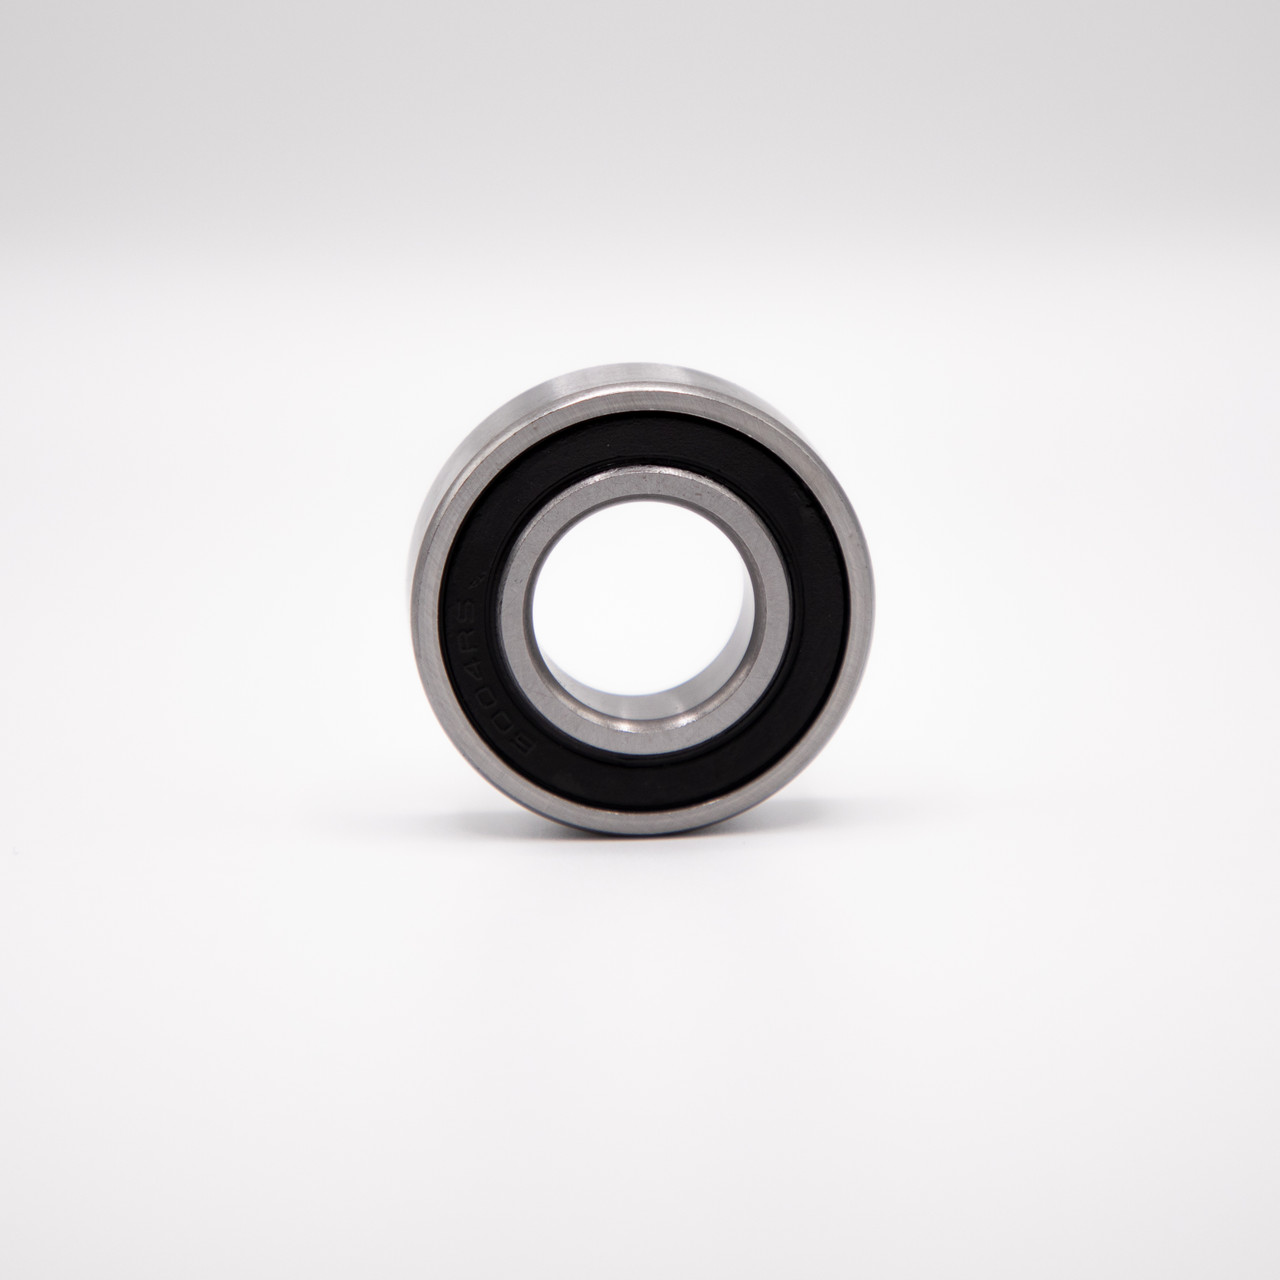 607-2RS Miniature Ball Bearing 7x19x6 Front View